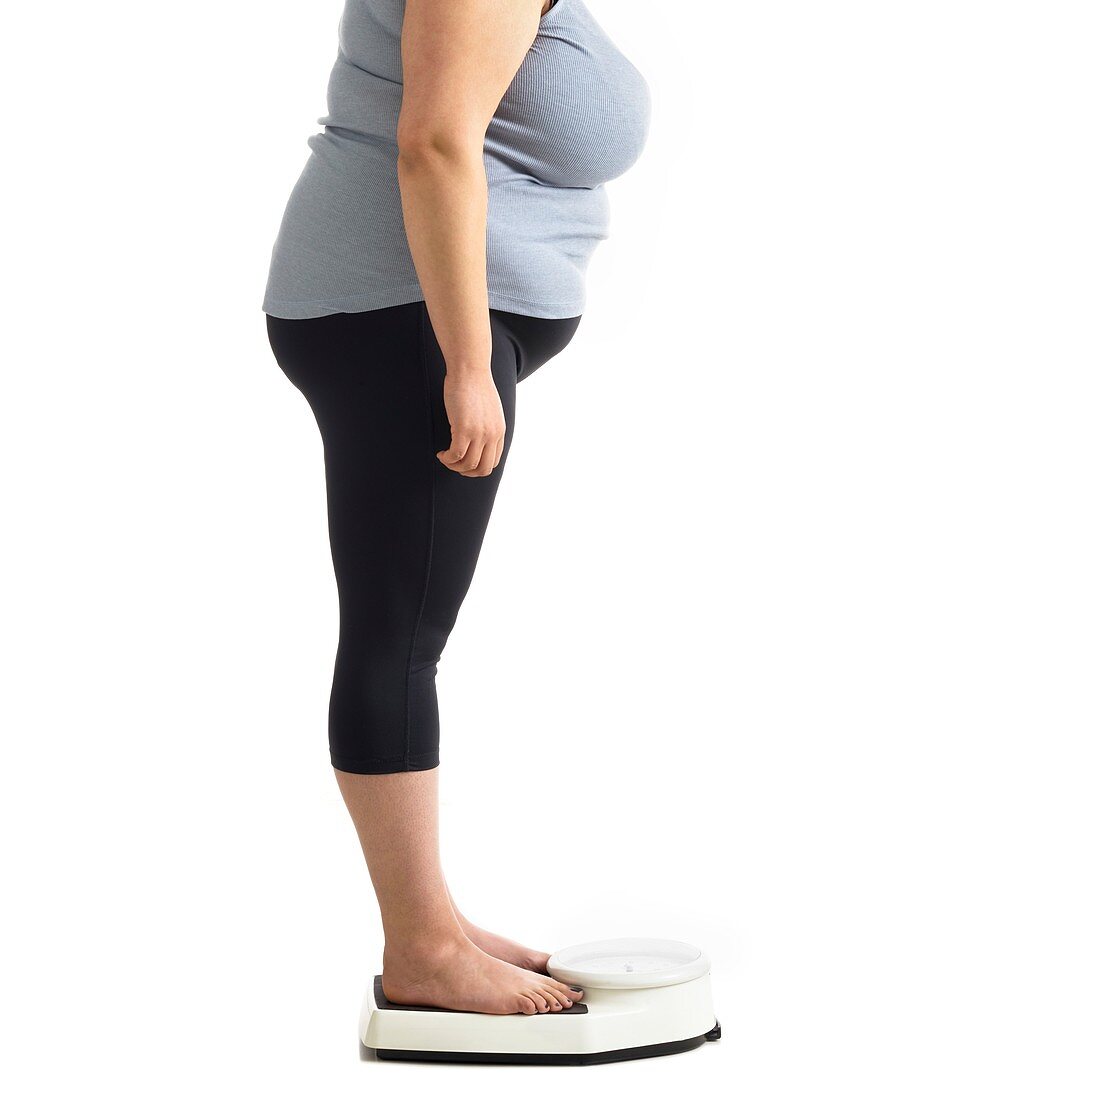 Overweight woman standing on weighing scales